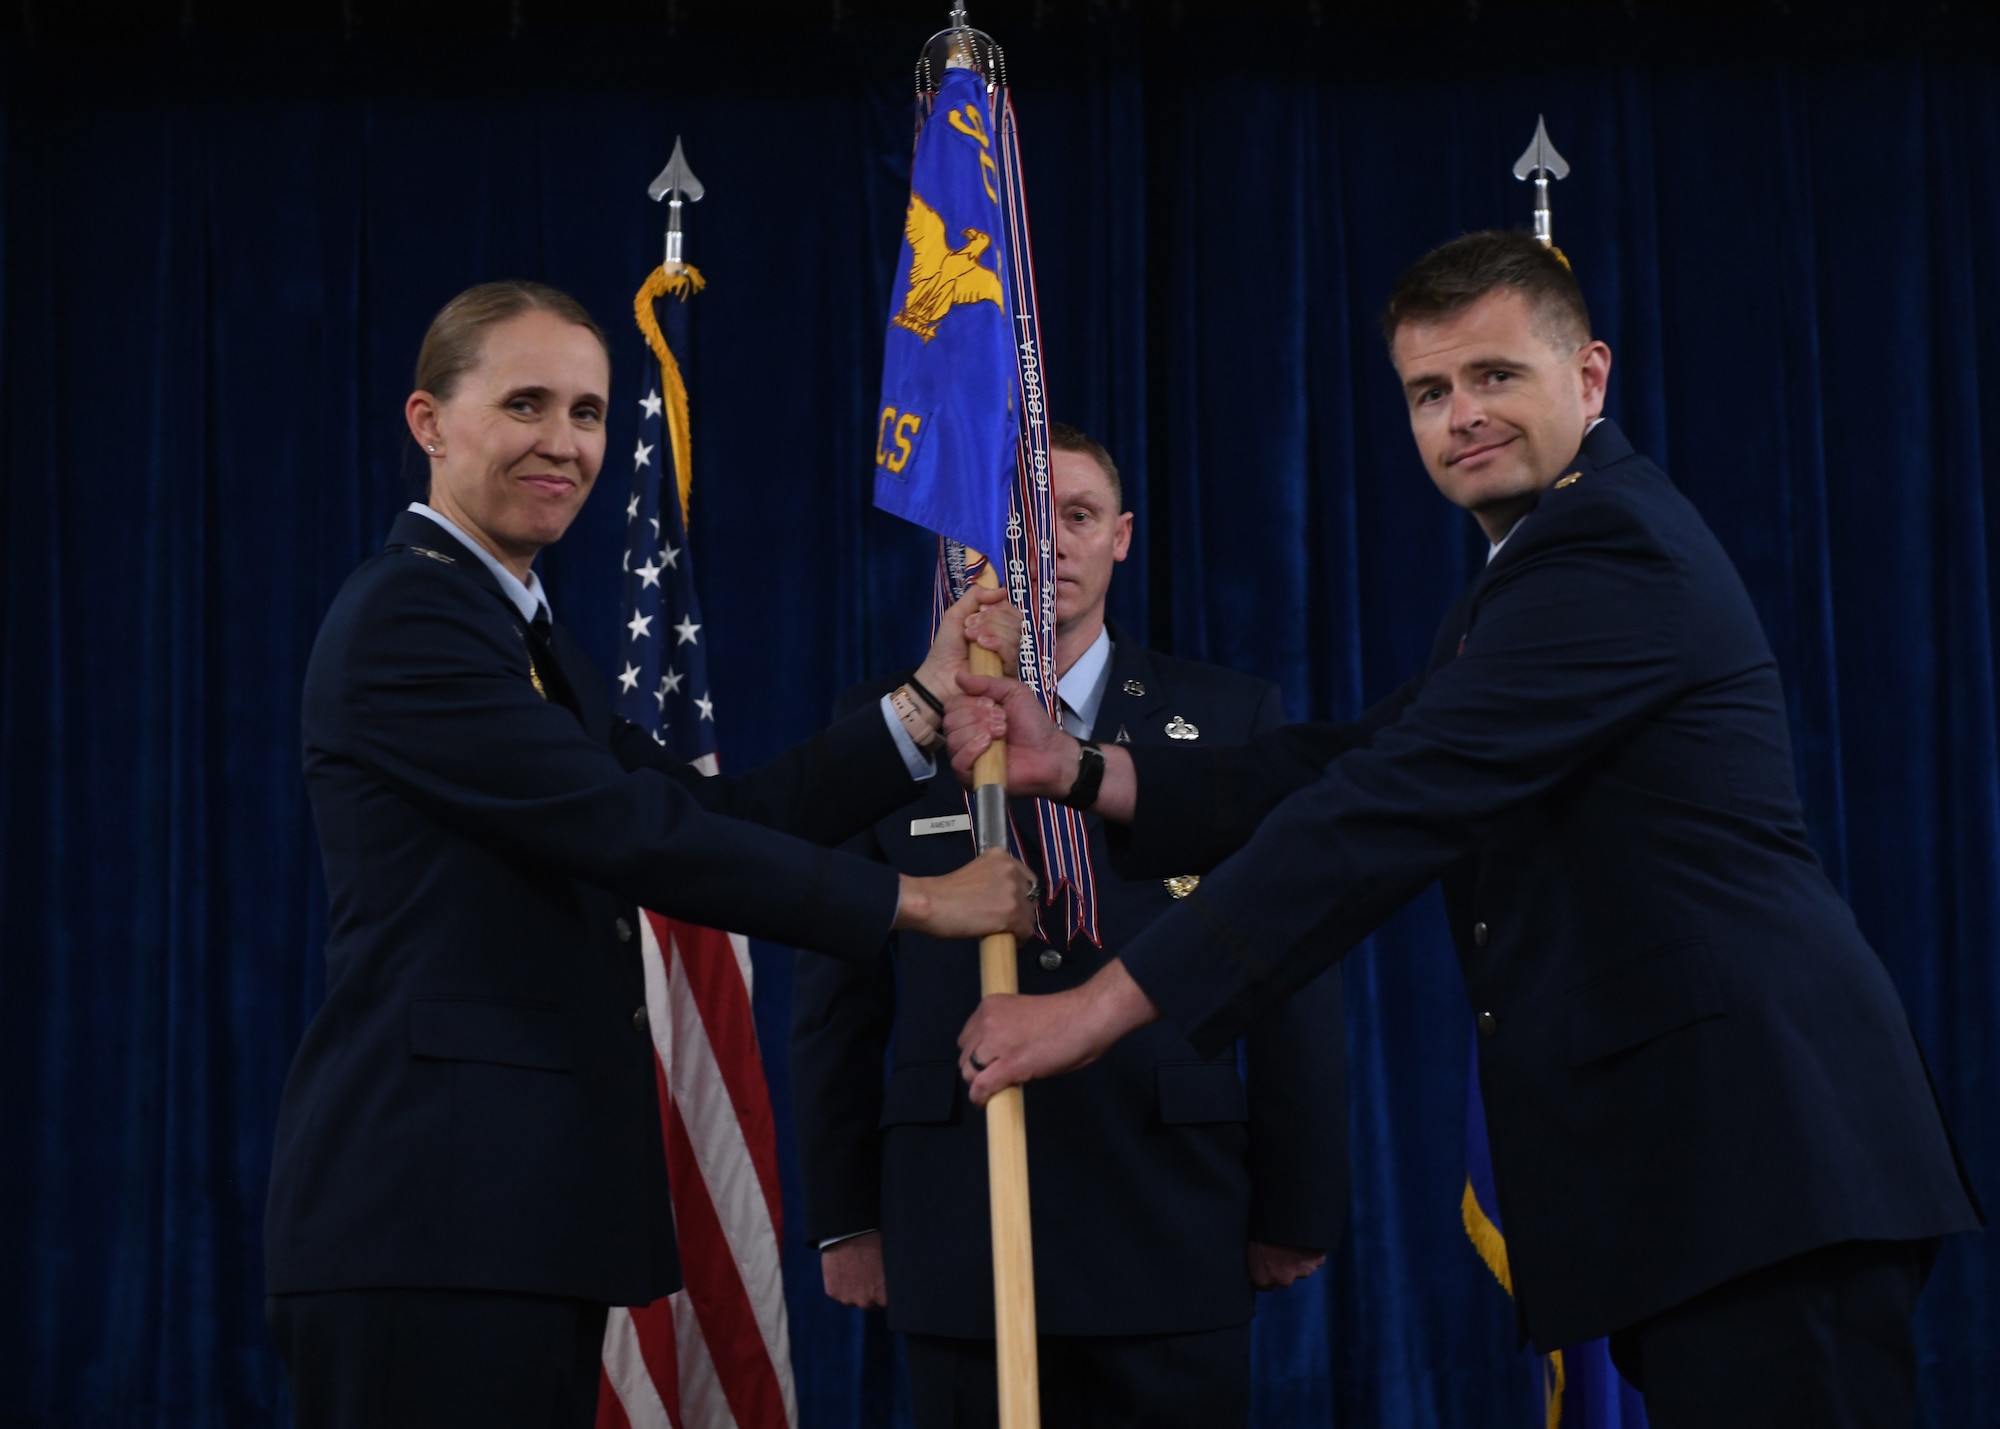 Col. Carolyn Ammons (left), commander of the 90th Mission Support Group, passes the guidon to Maj. Jeffrey Mickelsen, the incoming commander of the 90th Communication Squadron, during a change of command ceremony on F.E. Warren Air Force Base, June 13, 2022. The change of command ceremony signifies the transition of command from Lt. Col. Joseph Manning, the outgoing commander of 90 CS, to Mickelsen. (U.S. Air Force photo by Airman 1st Class Darius Frazier.)